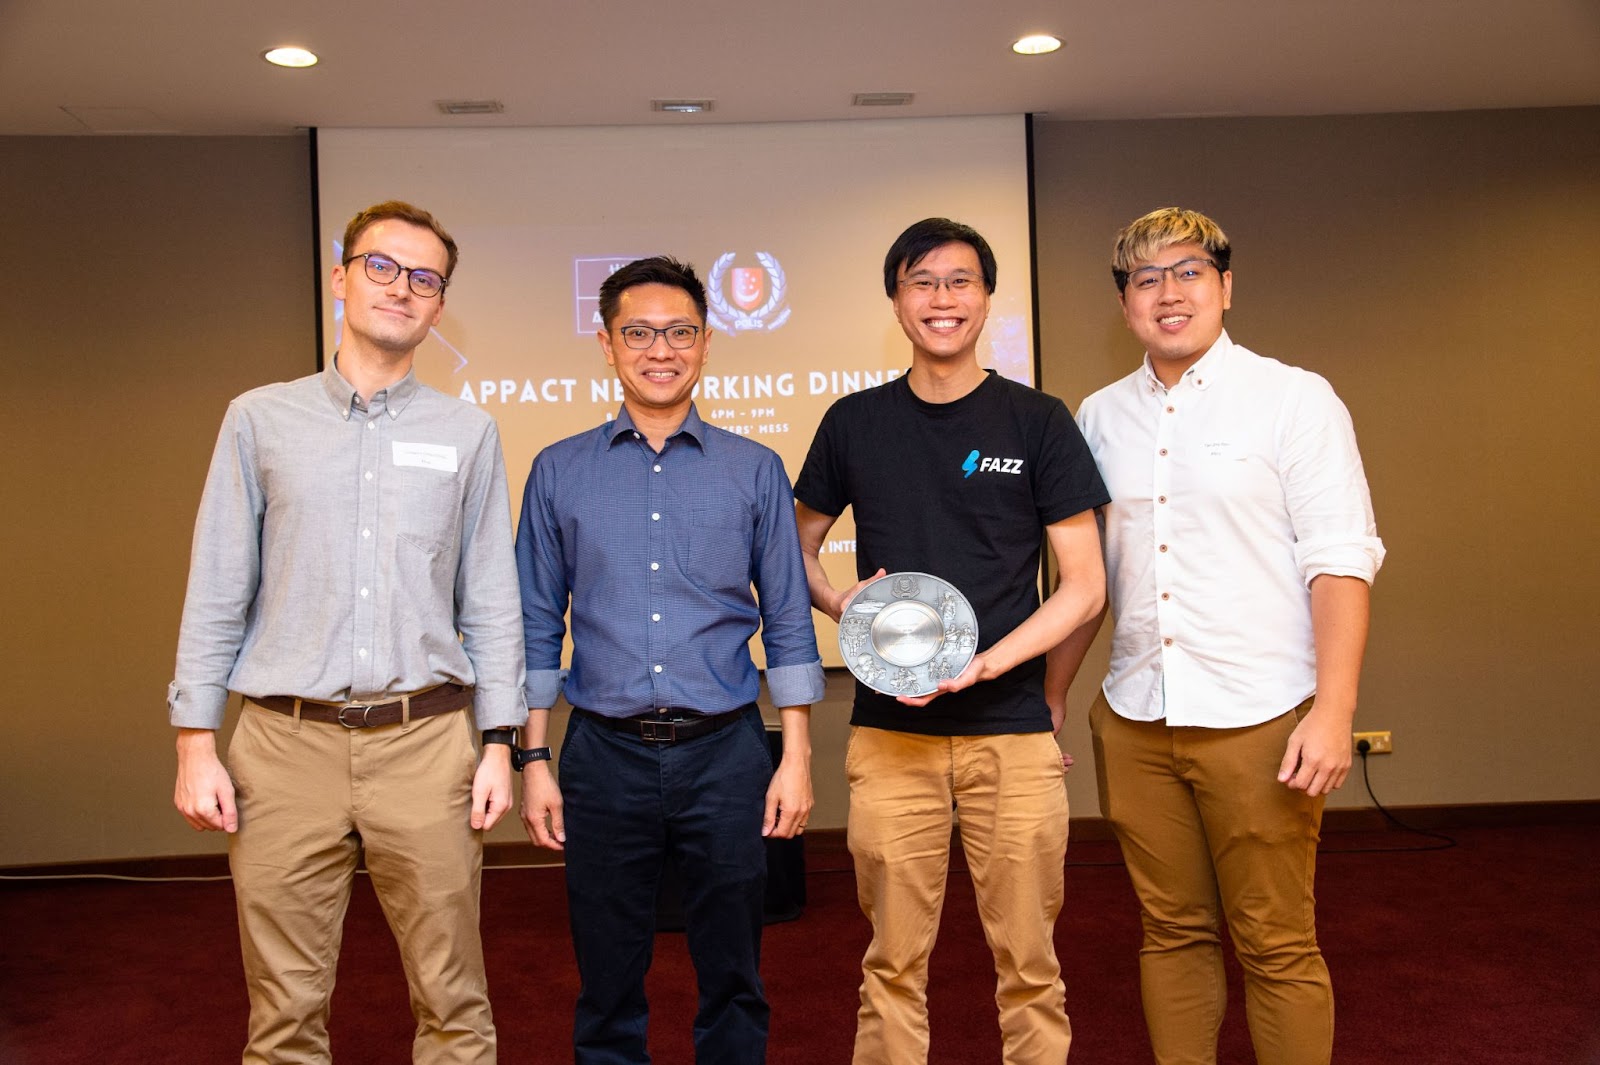 Fazz (formerly Xfers) awarded for the 5th time for unwavering commitment to fighting scams, fraud, and cybercrime